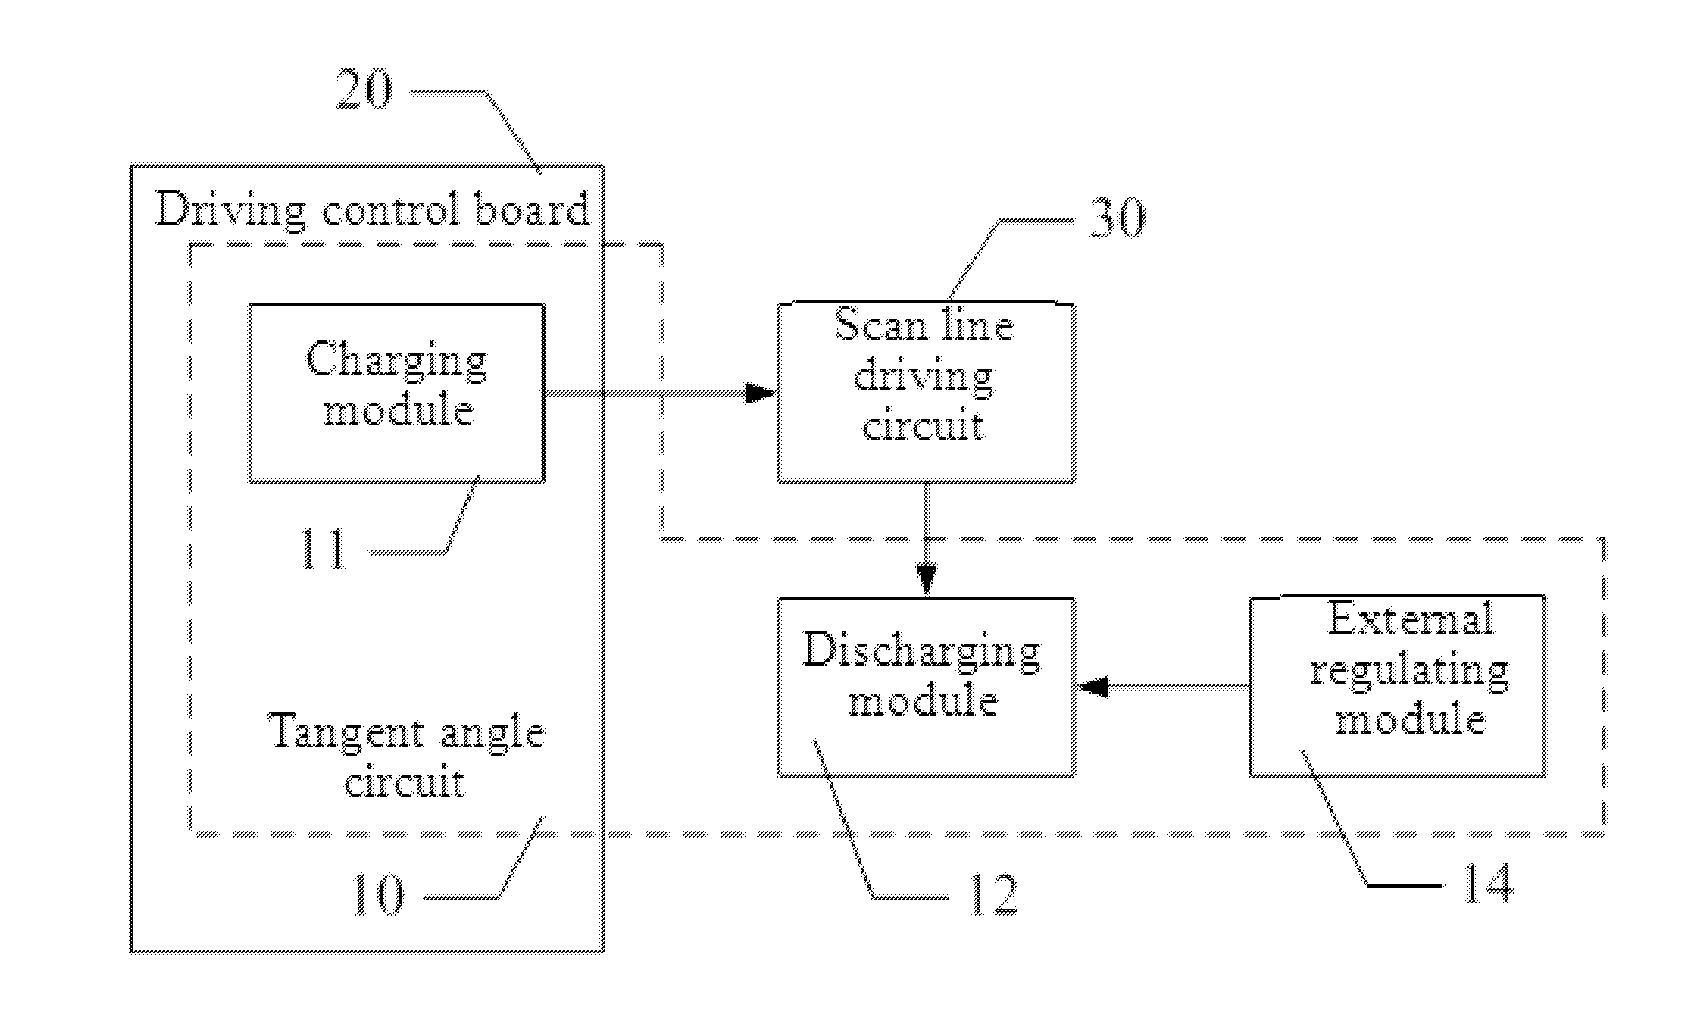 Tangent angle circuit in an LCD driving system and LCD driving system